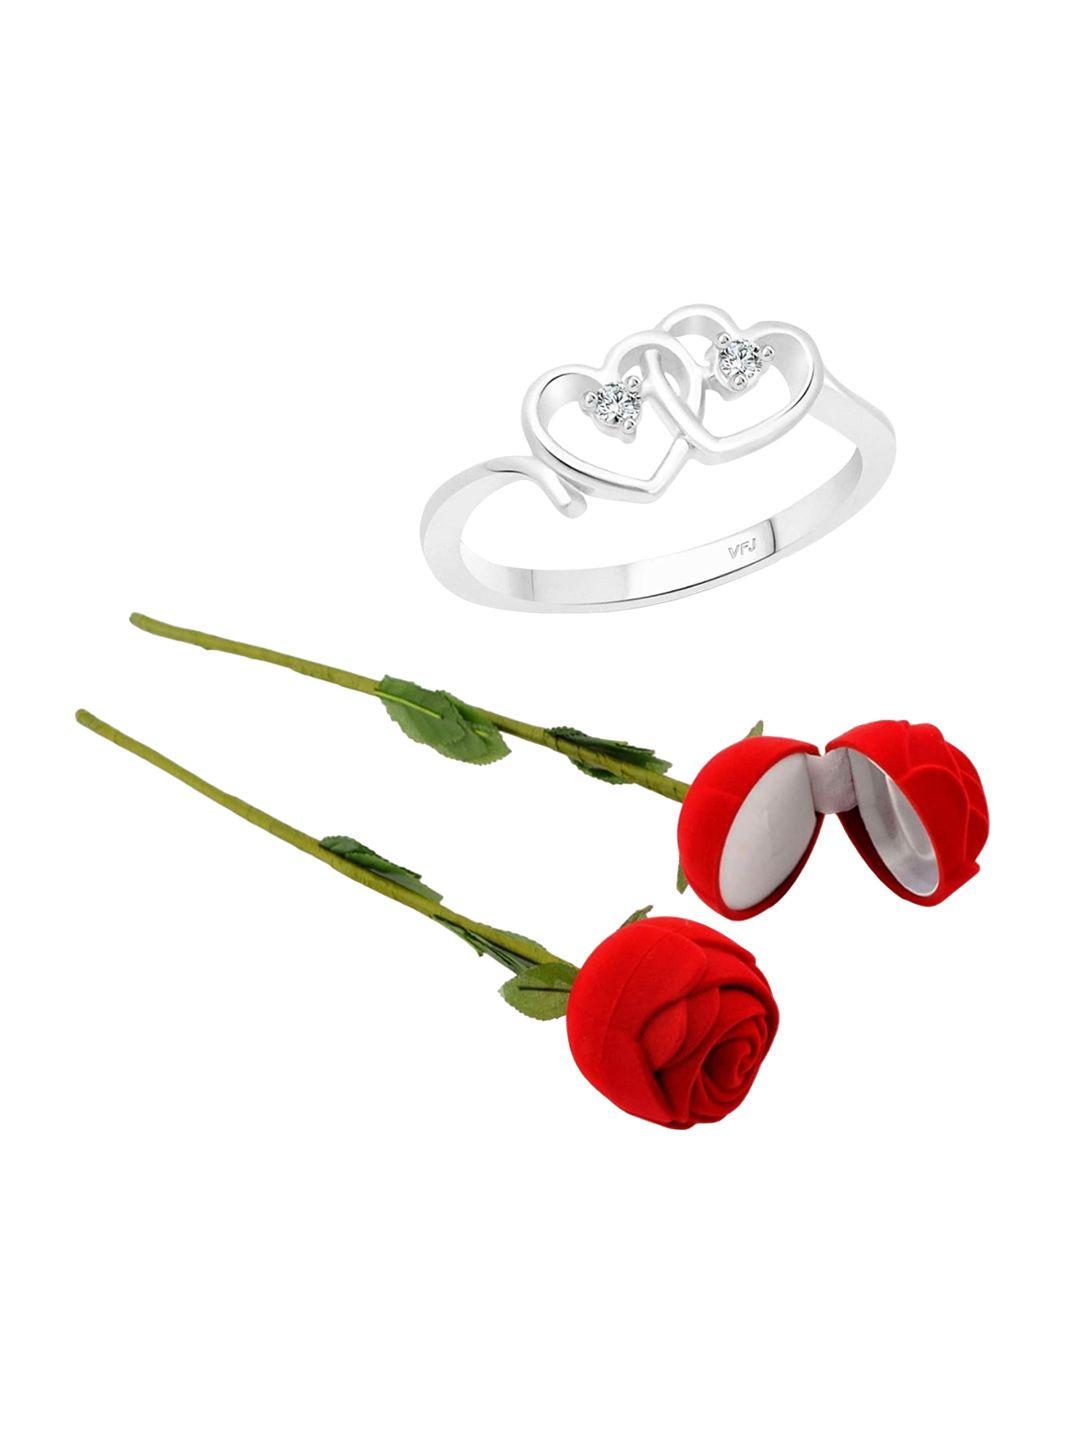 vighnaharta rhodium-plated cubic zirconia-studded heart design finger ring with rose box